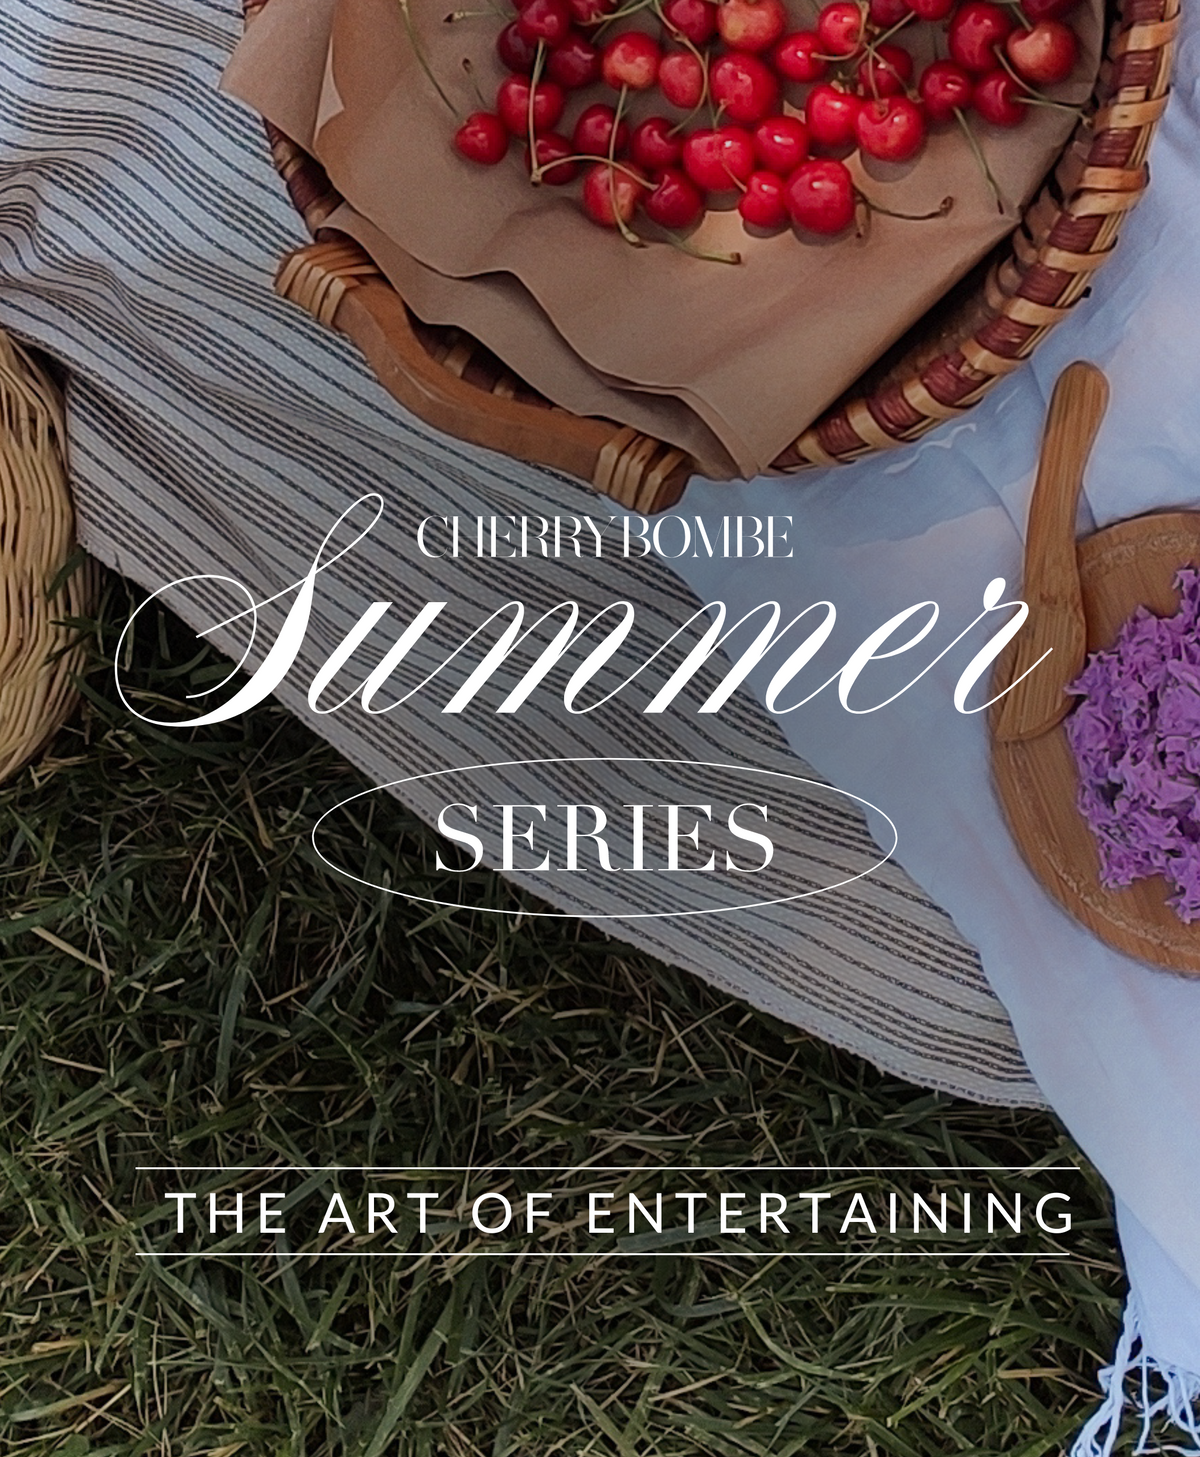 The Art of Entertaining: Sound View Greenport - Member Ticket